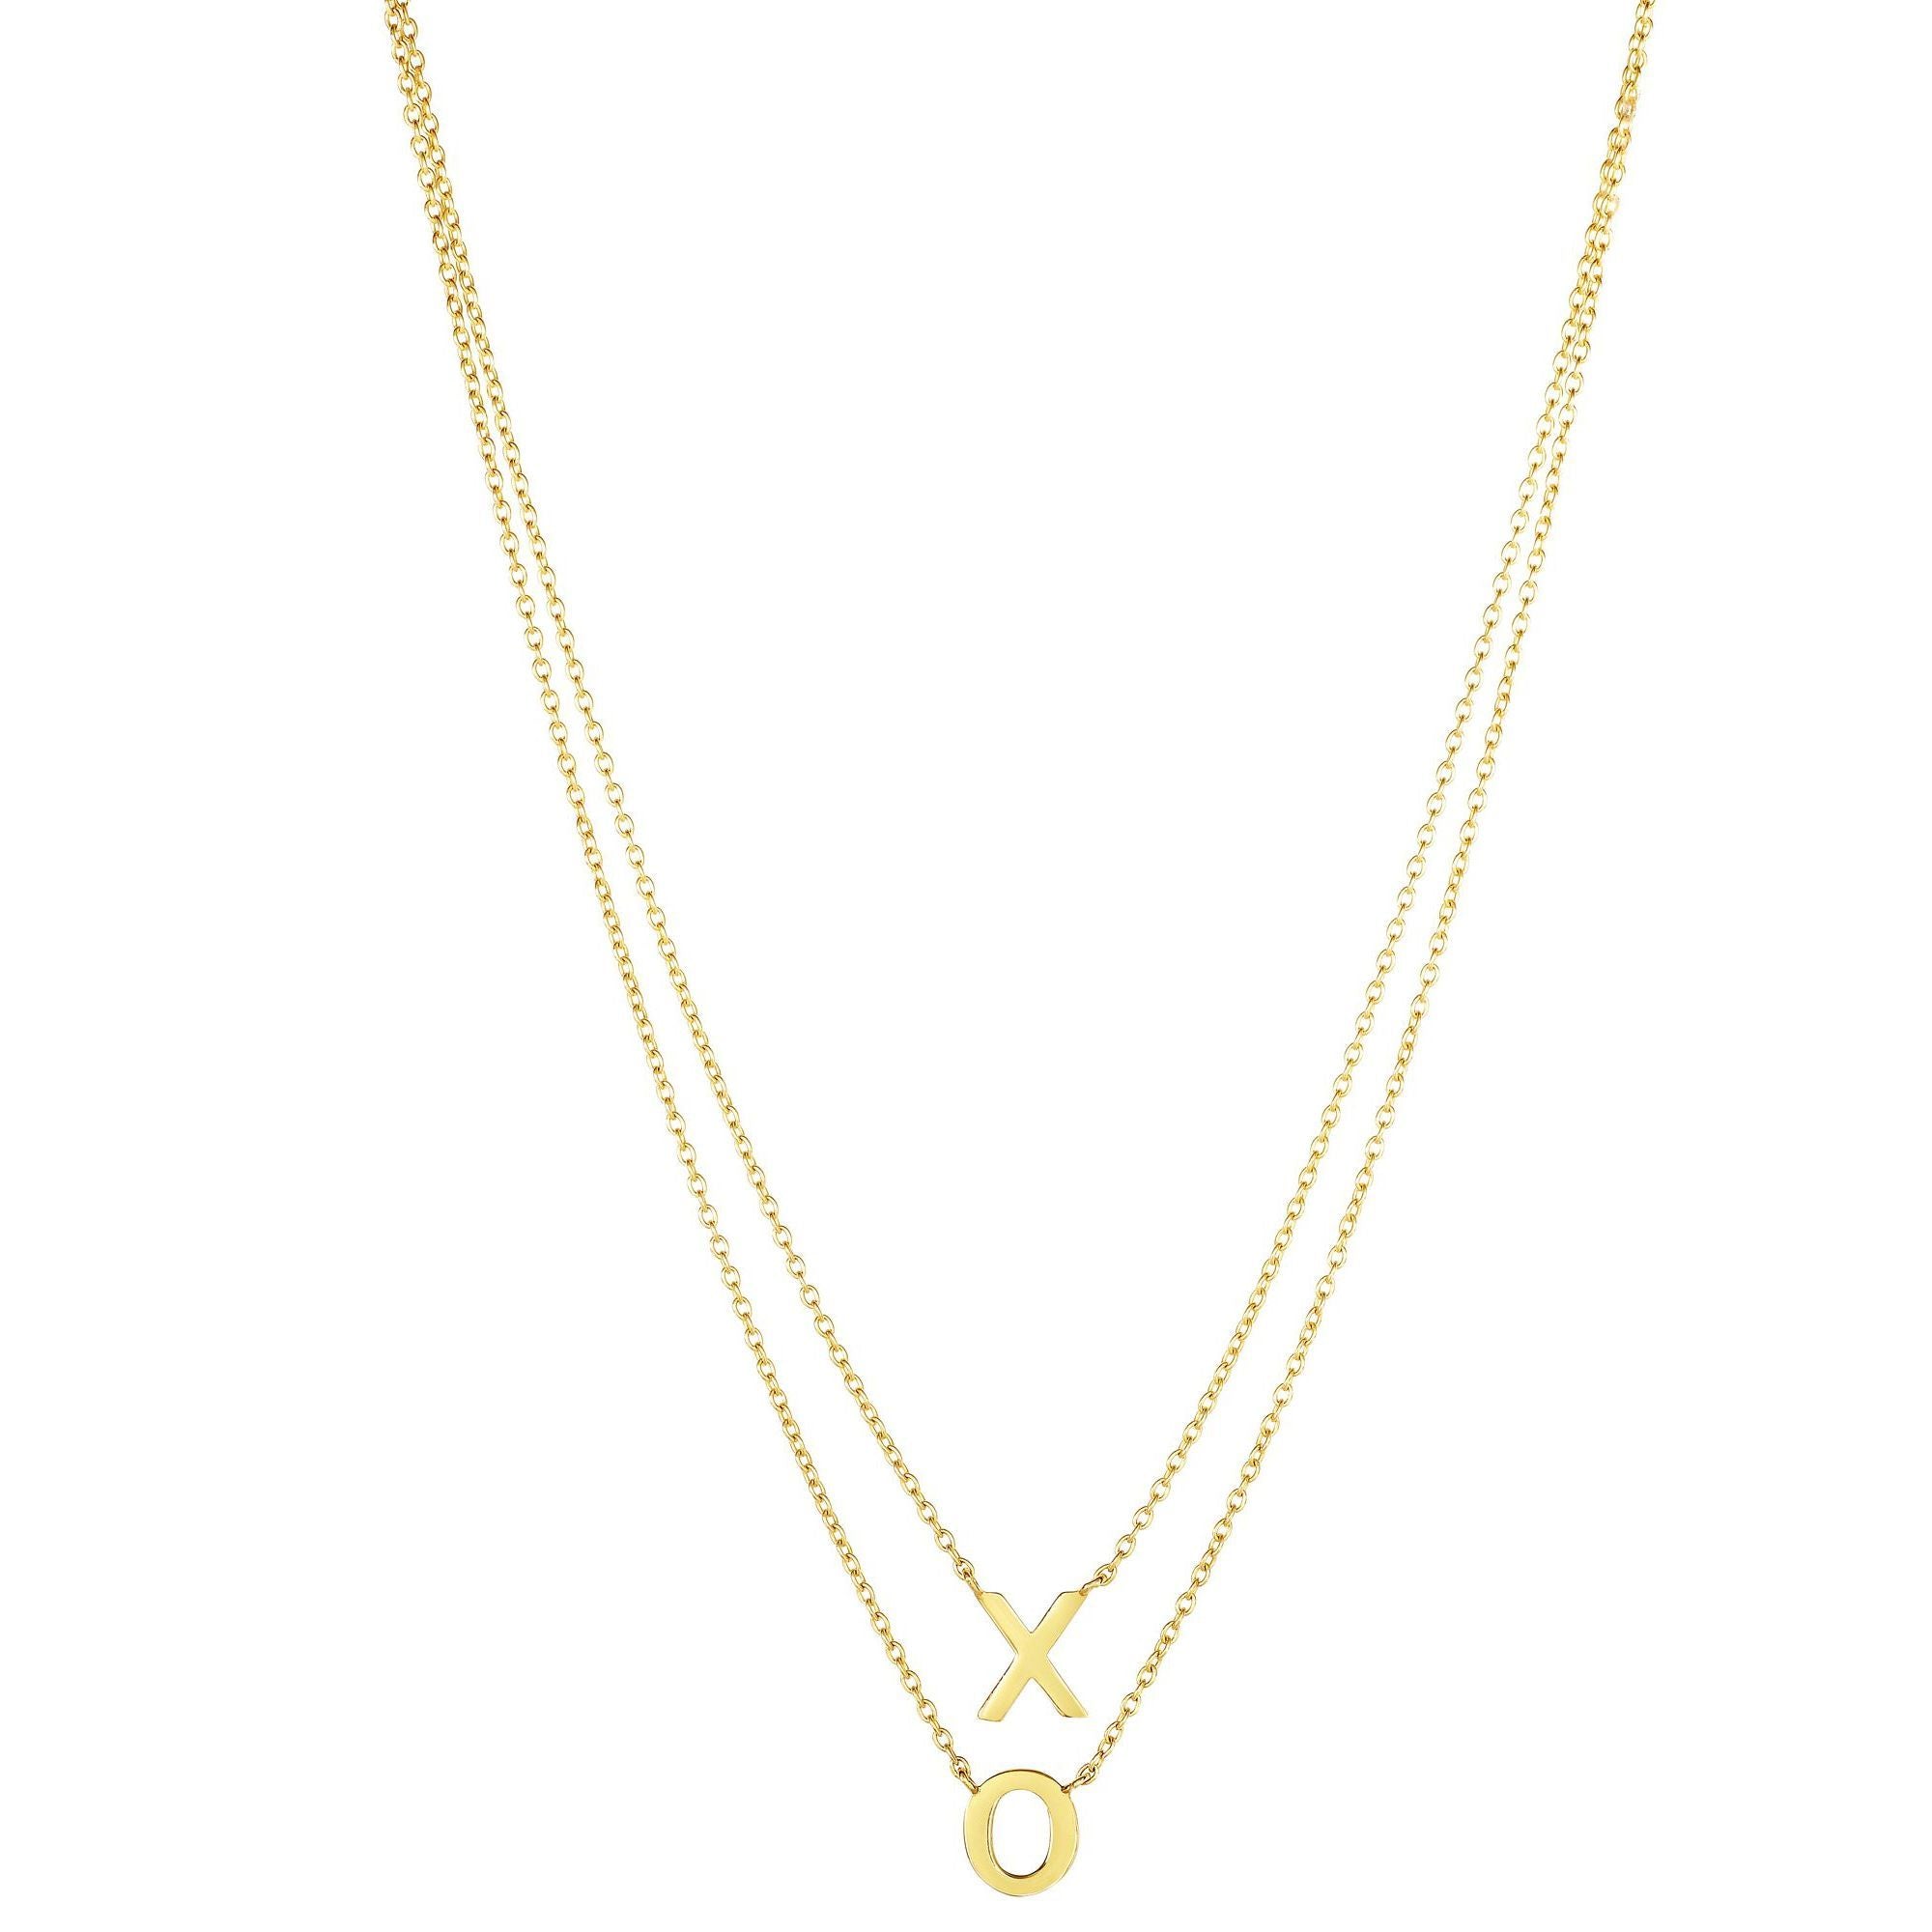 Minimalist Solid Gold Hug and Kisses Layered Necklace - wingroupjewelry